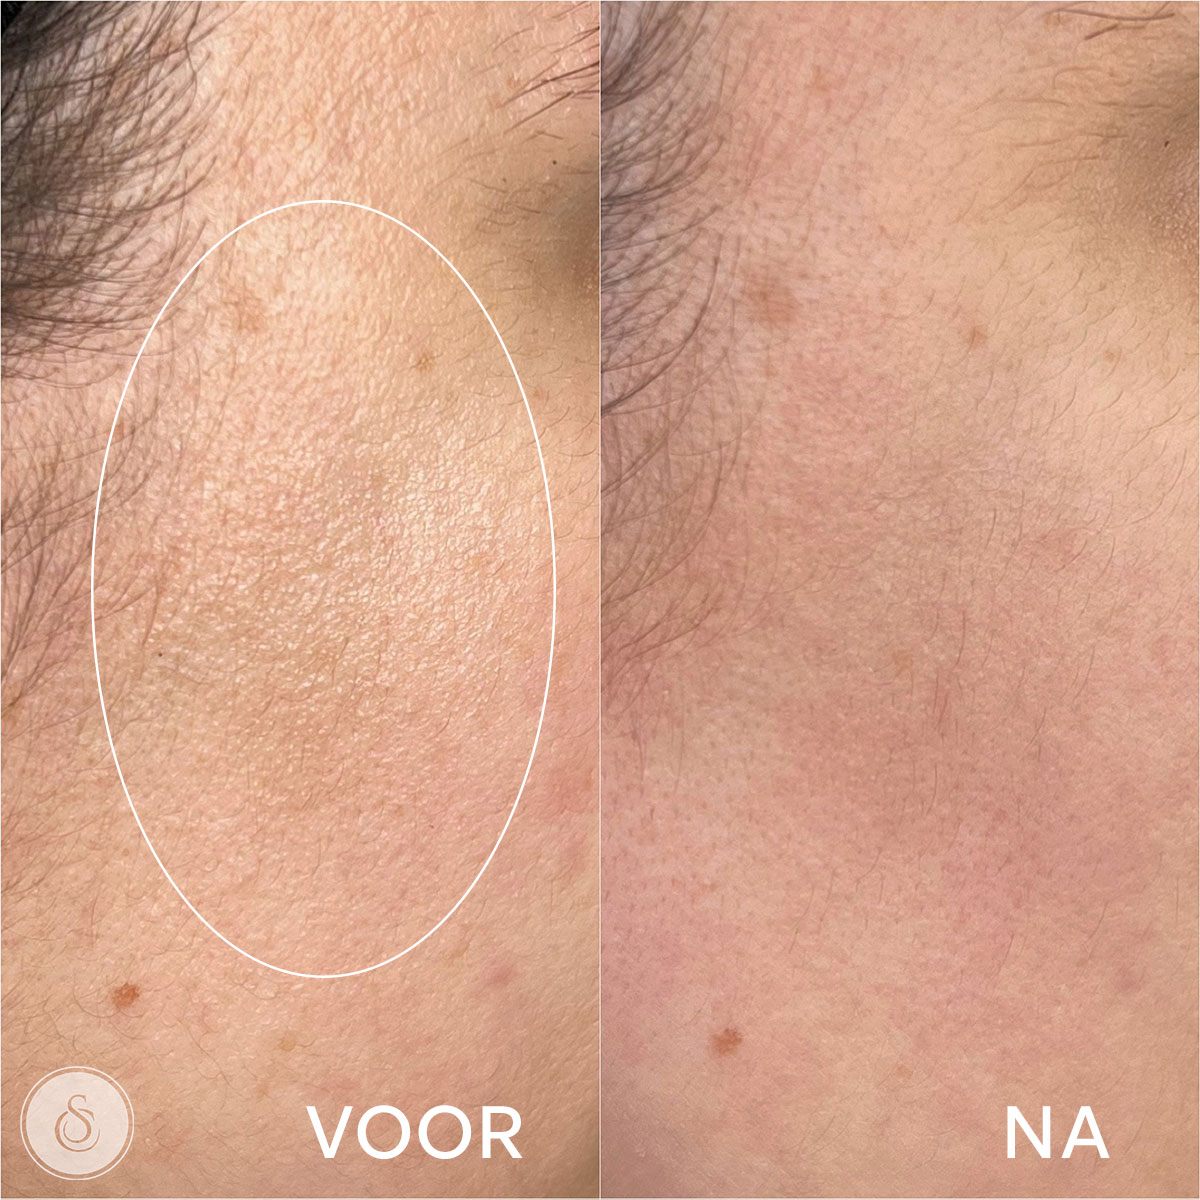 Sarasin Clinic Aquashine large pores before and after